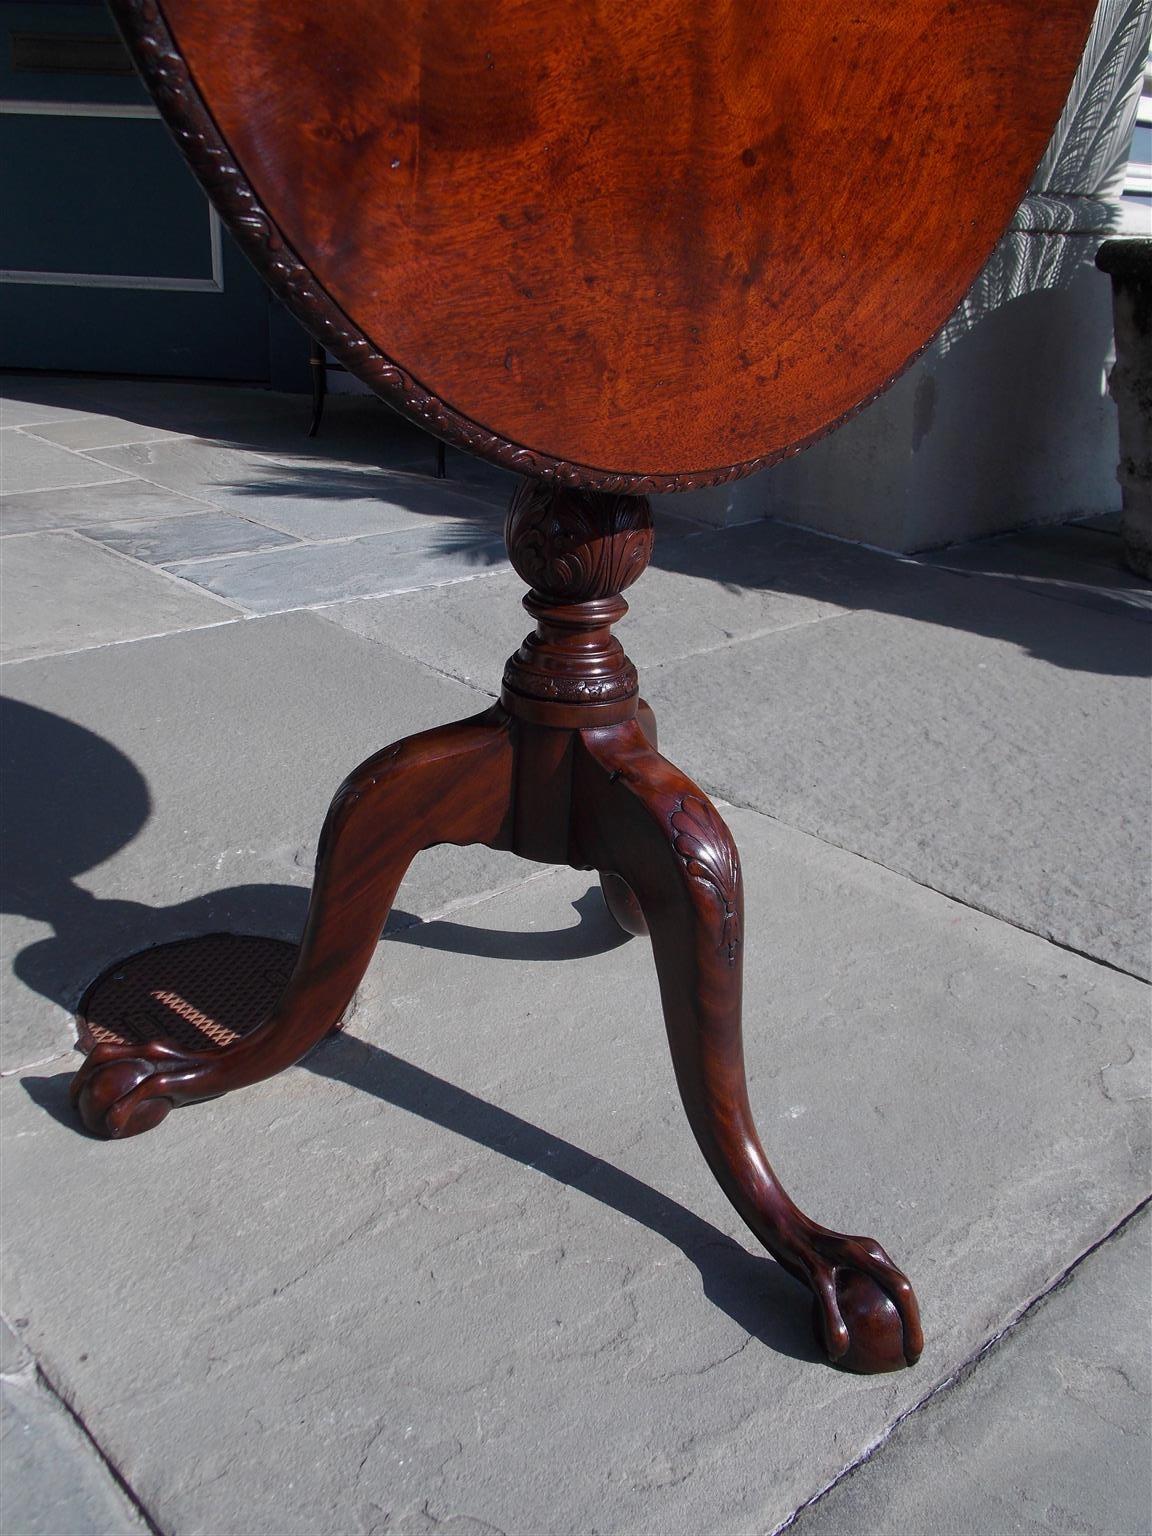 Chippendale Irish Plum Pudding Mahogany Tilt-Top Acanthus Tea Table with Birdcage Circa 1770 For Sale